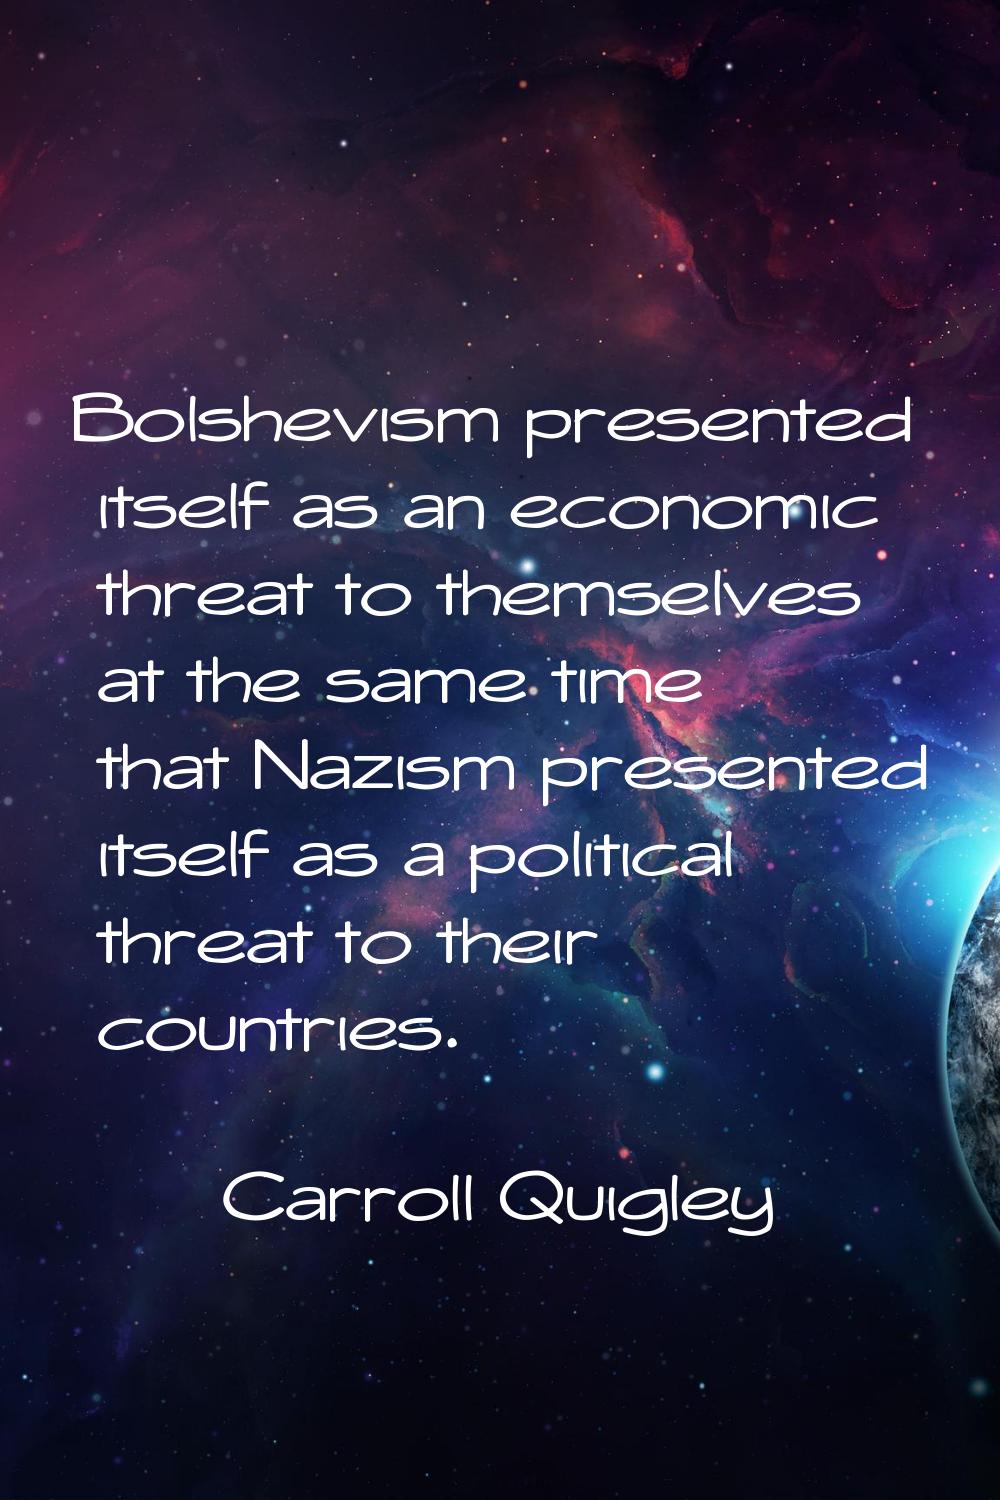 Bolshevism presented itself as an economic threat to themselves at the same time that Nazism presen